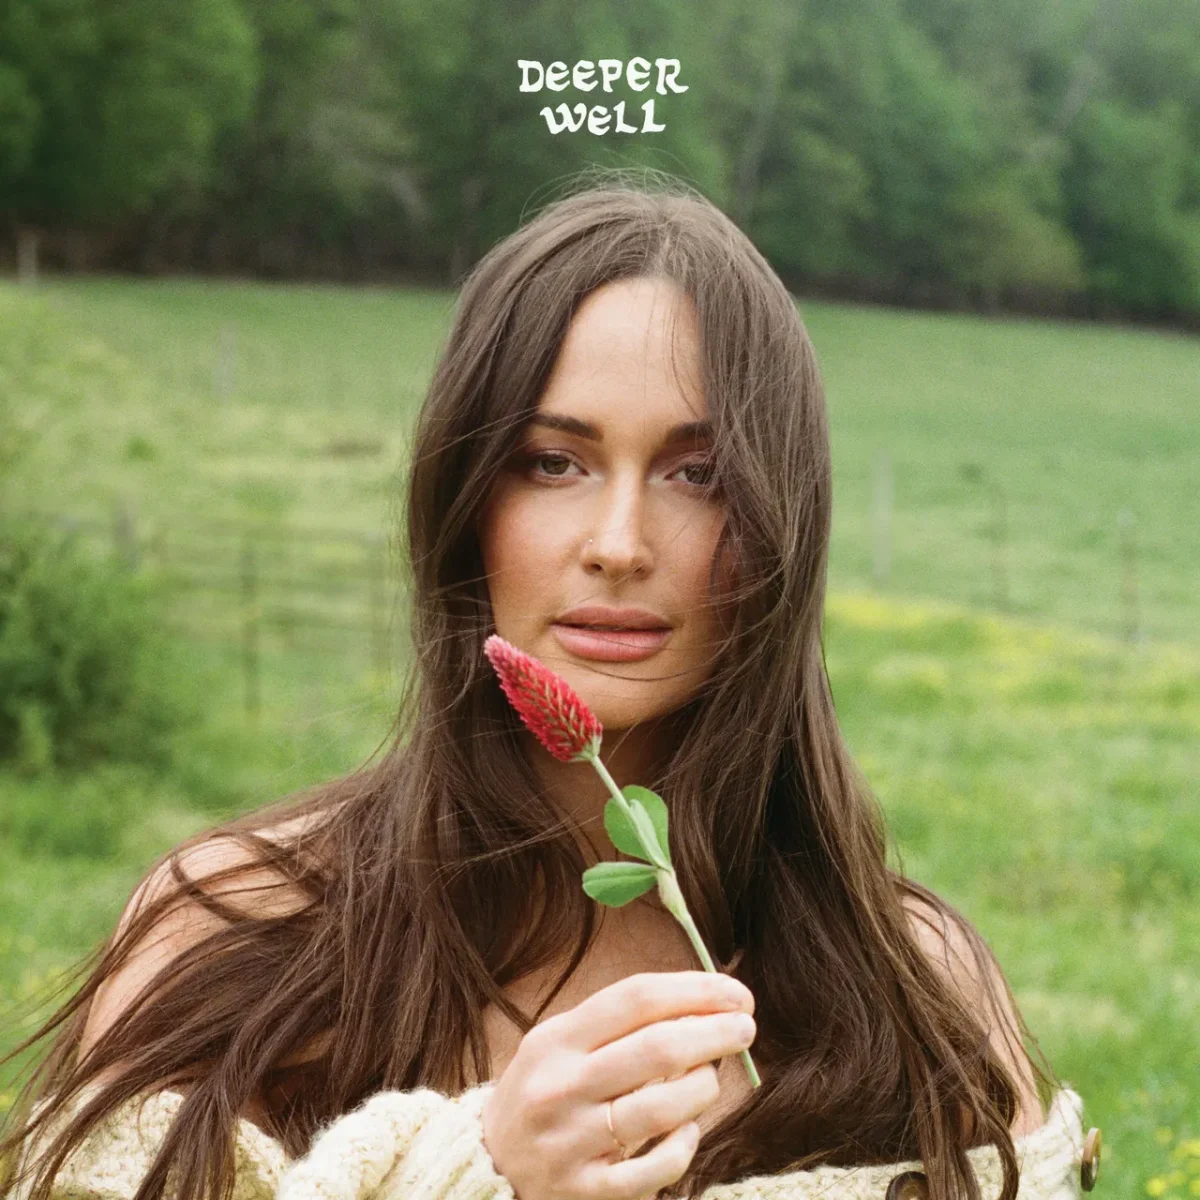 Album+cover+of+Musgraves+sixth+studio+album+titled+Deeper+Well